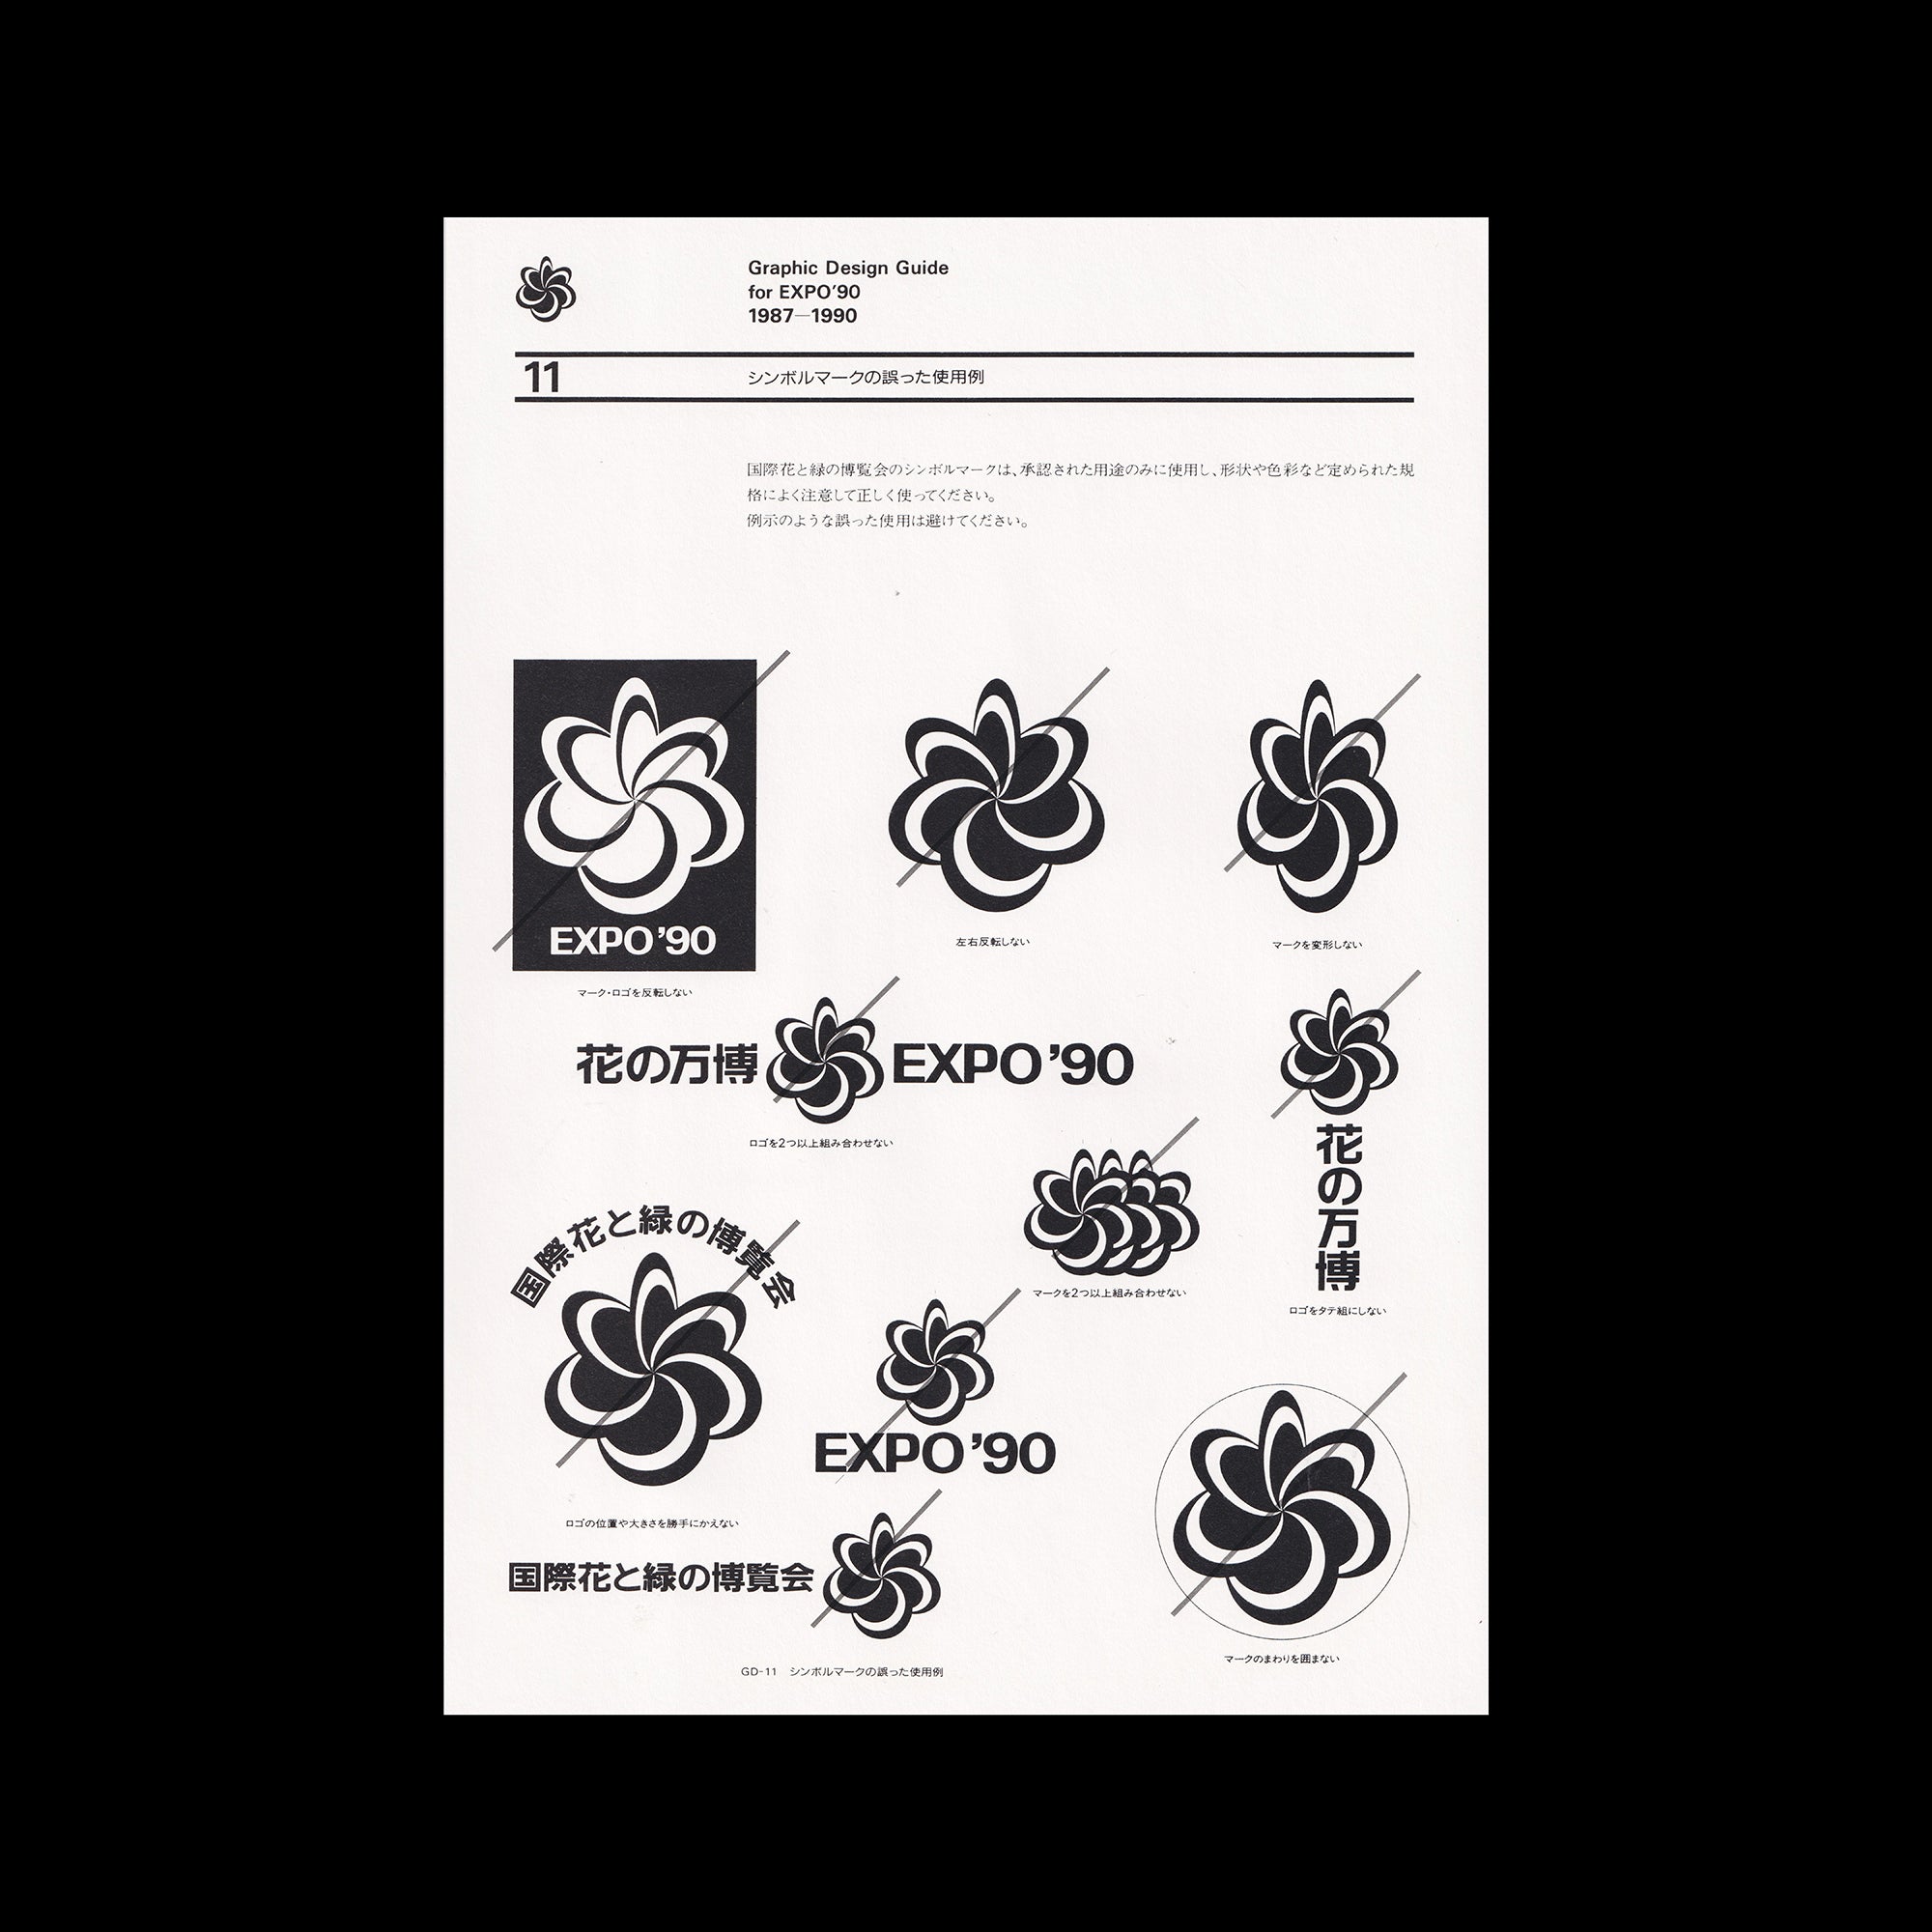 Expo 90 Brand Guidelines, 1987